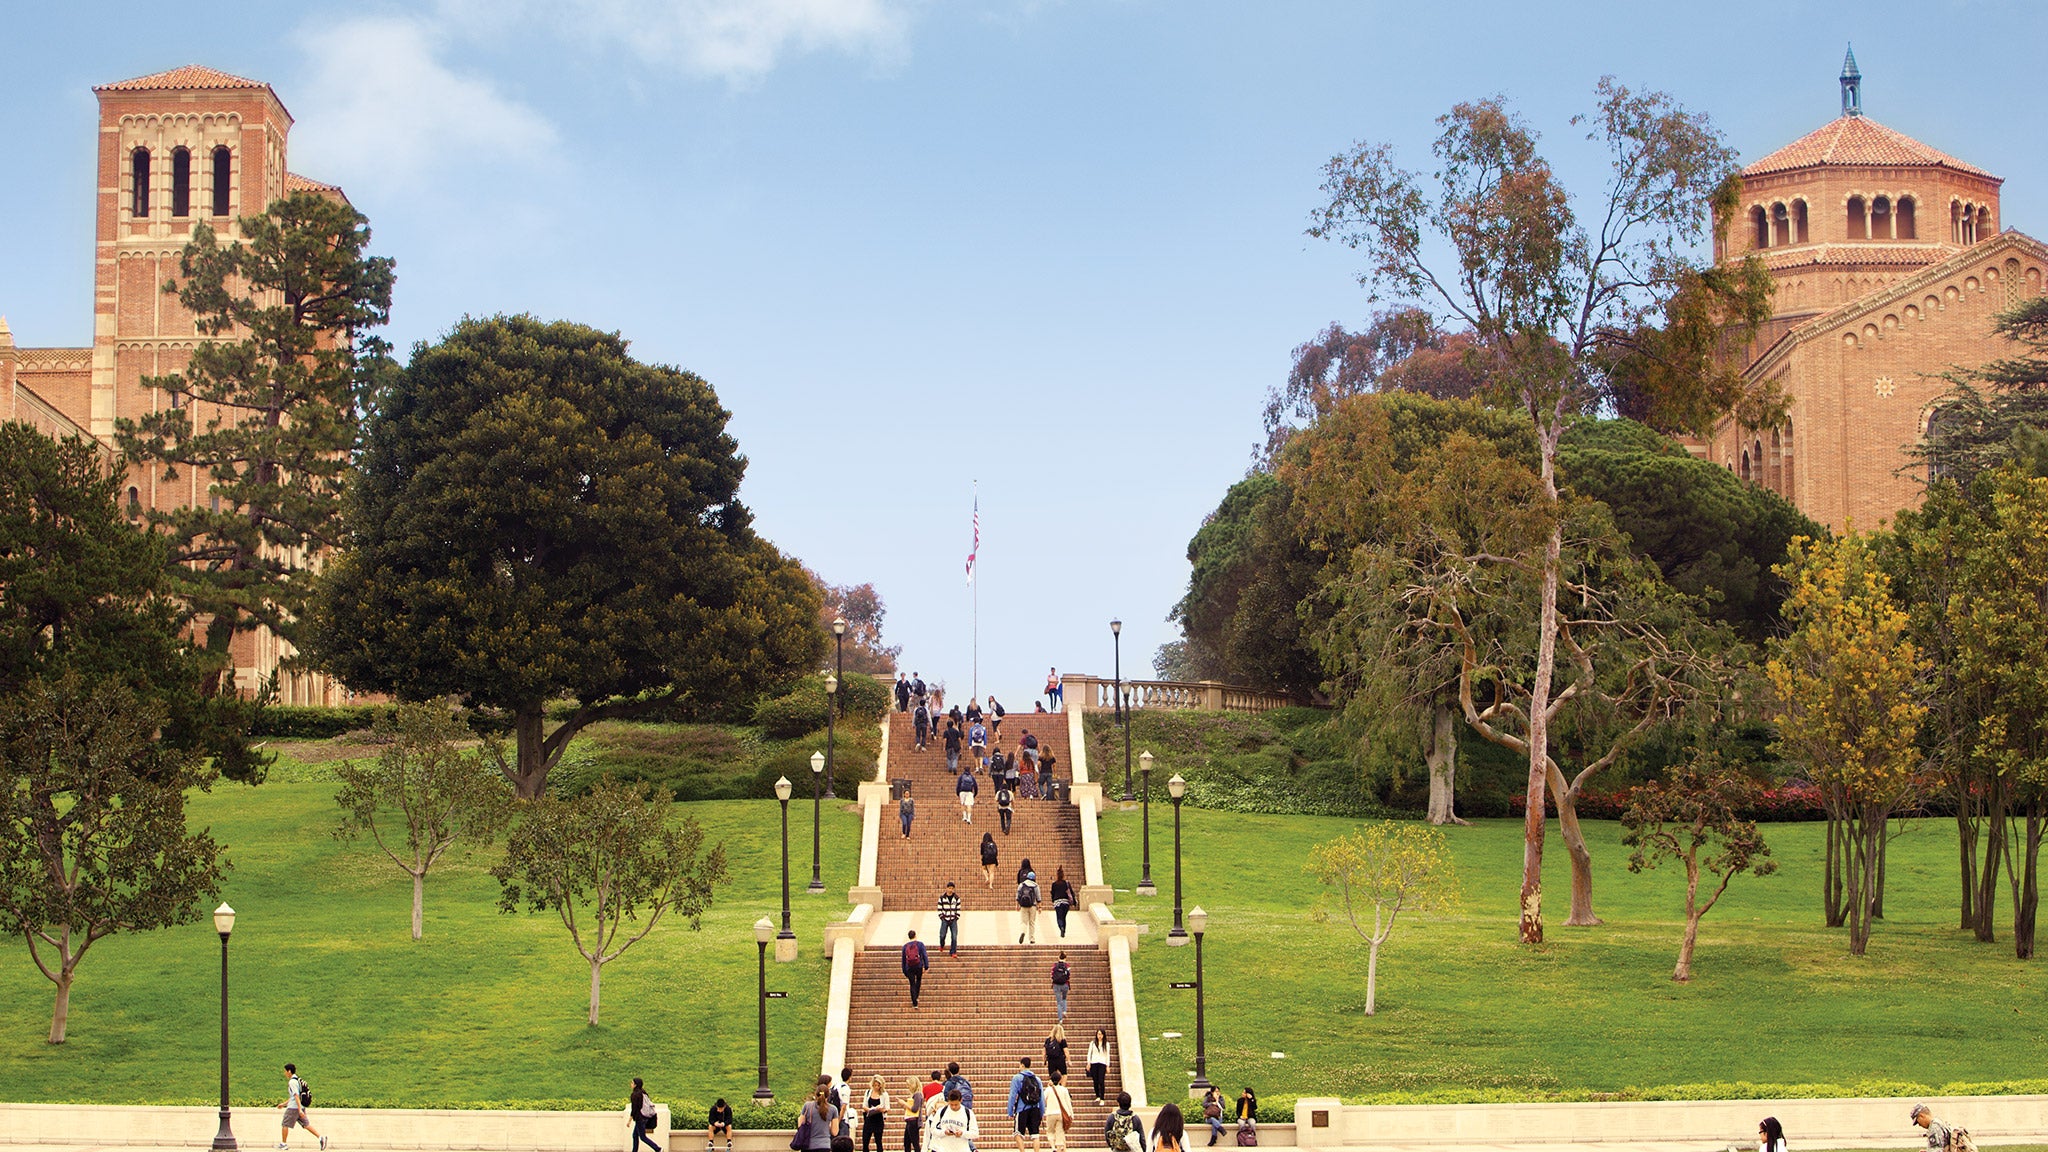 Students make their way up Janss Steps, which served as the original entrance to UCLA.